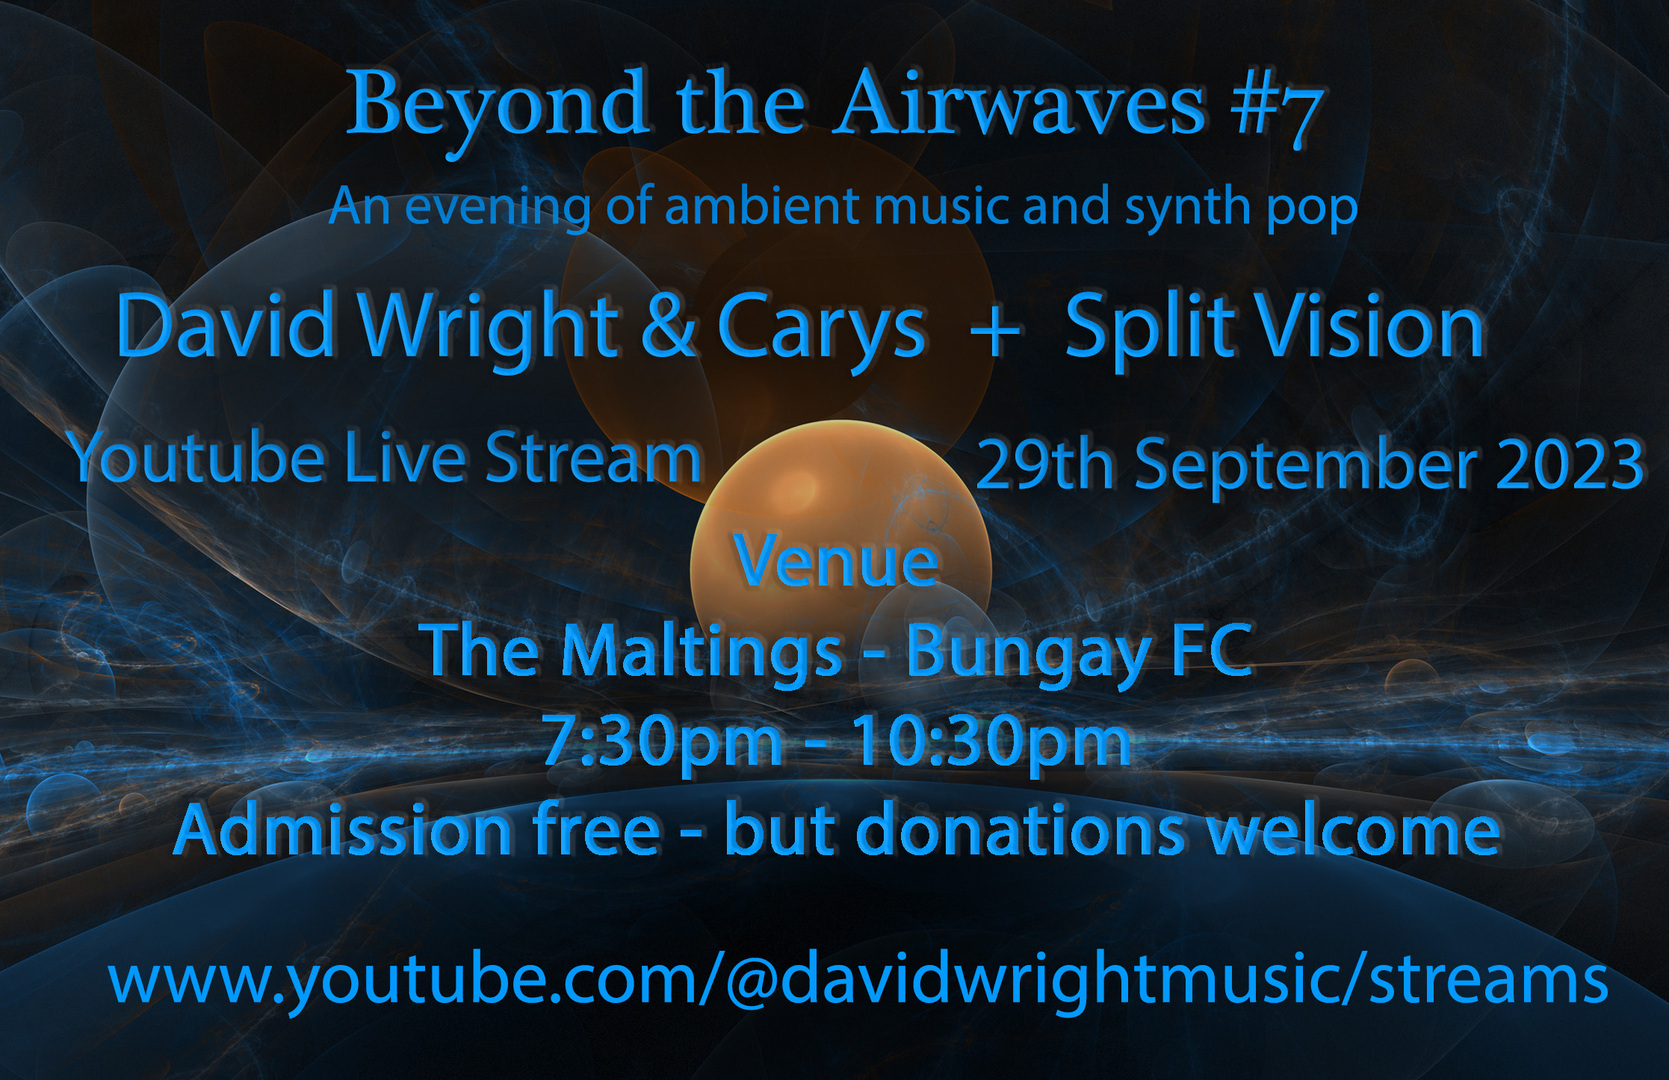 Beyond the Airwaves #7 Ambient Music with David Wright and Carys plus guest from Sweden 'Split Vision, Online Event